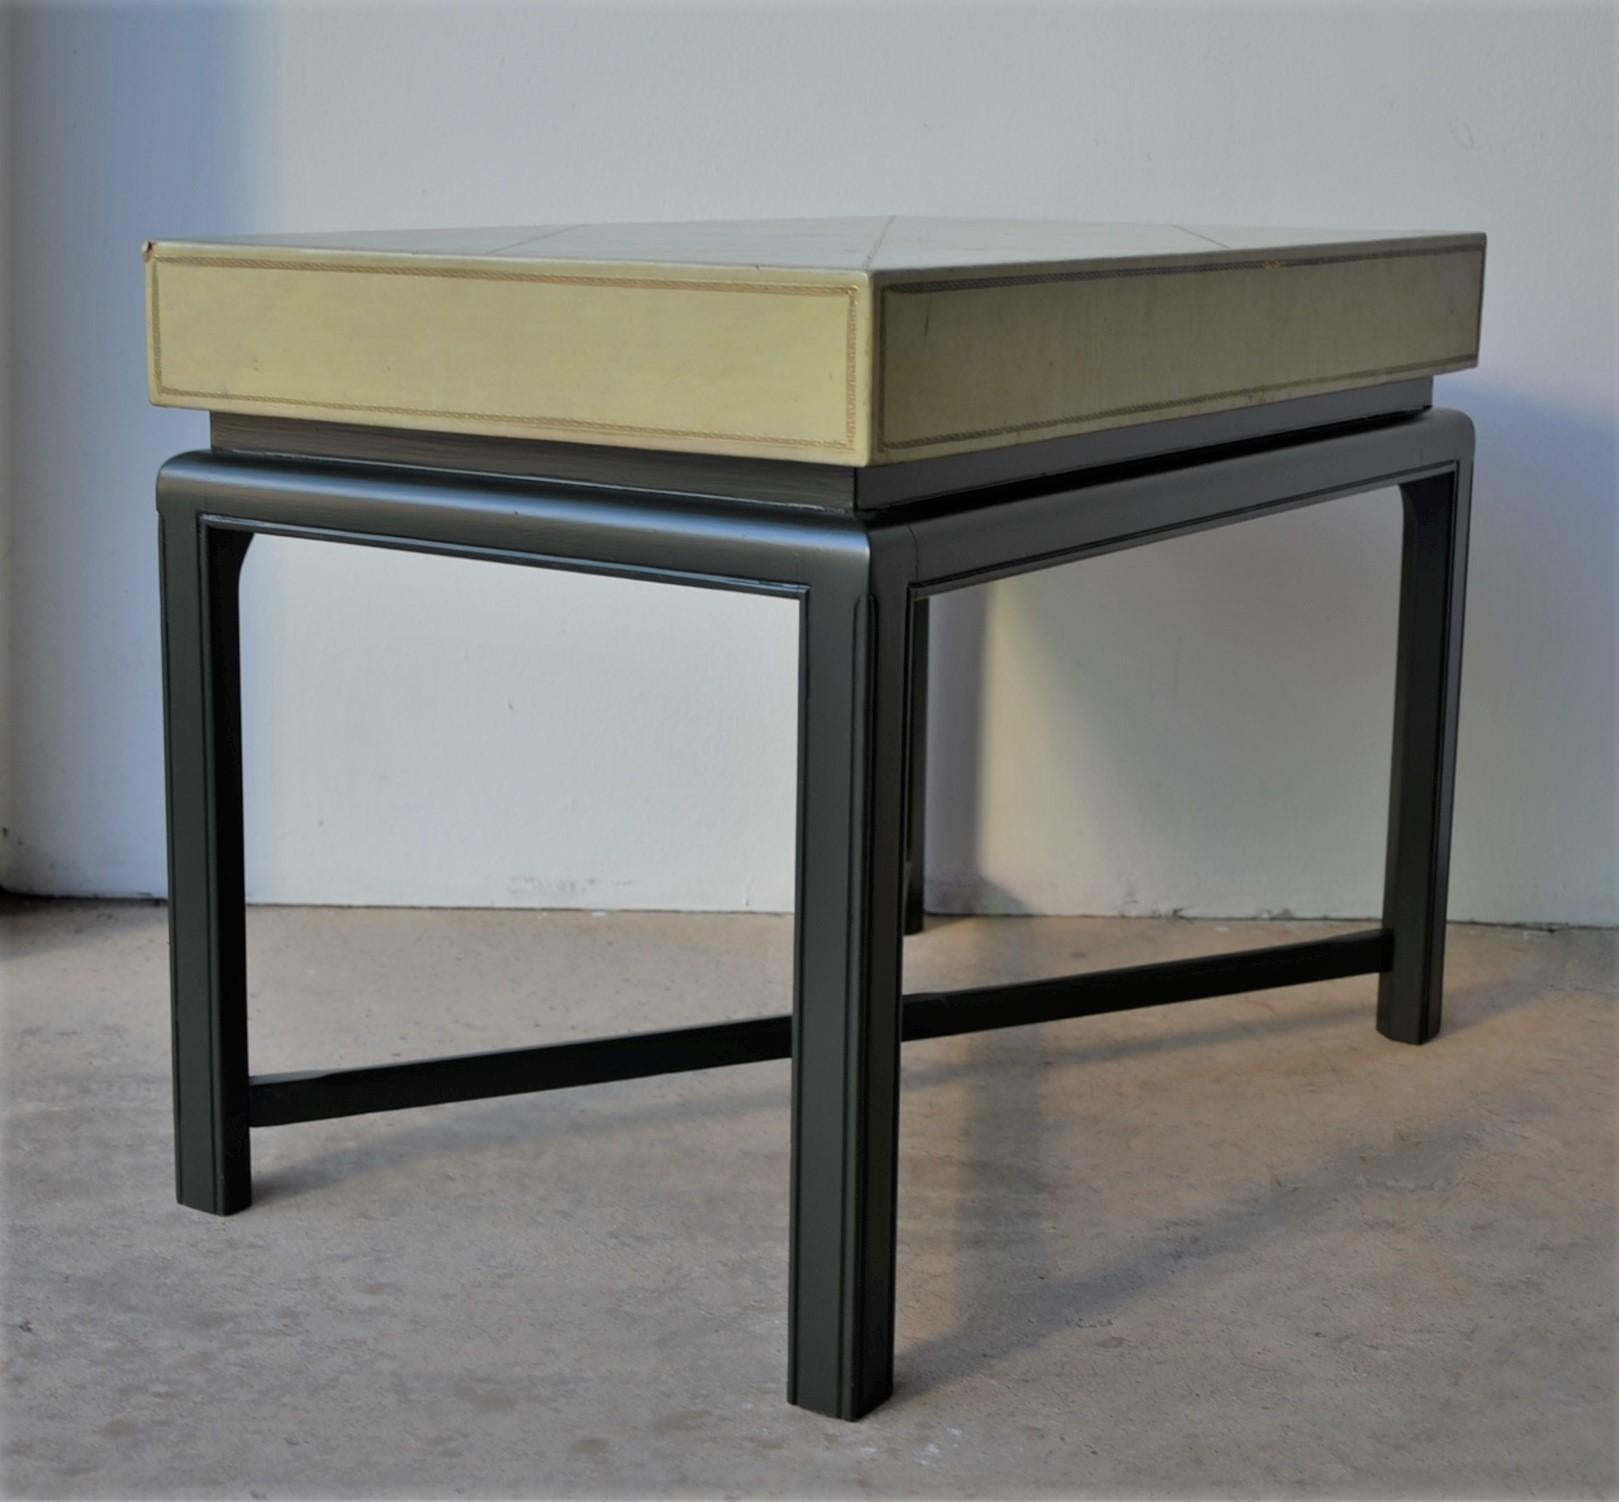 Offered is a Mid-Century Modern small and elegant side table by Tommi Parzinger, light green with gold accents tooled leather wrapping of a rectangular box-form top poised atop a newly lacquered dark green wood base with X-form stretcher. While